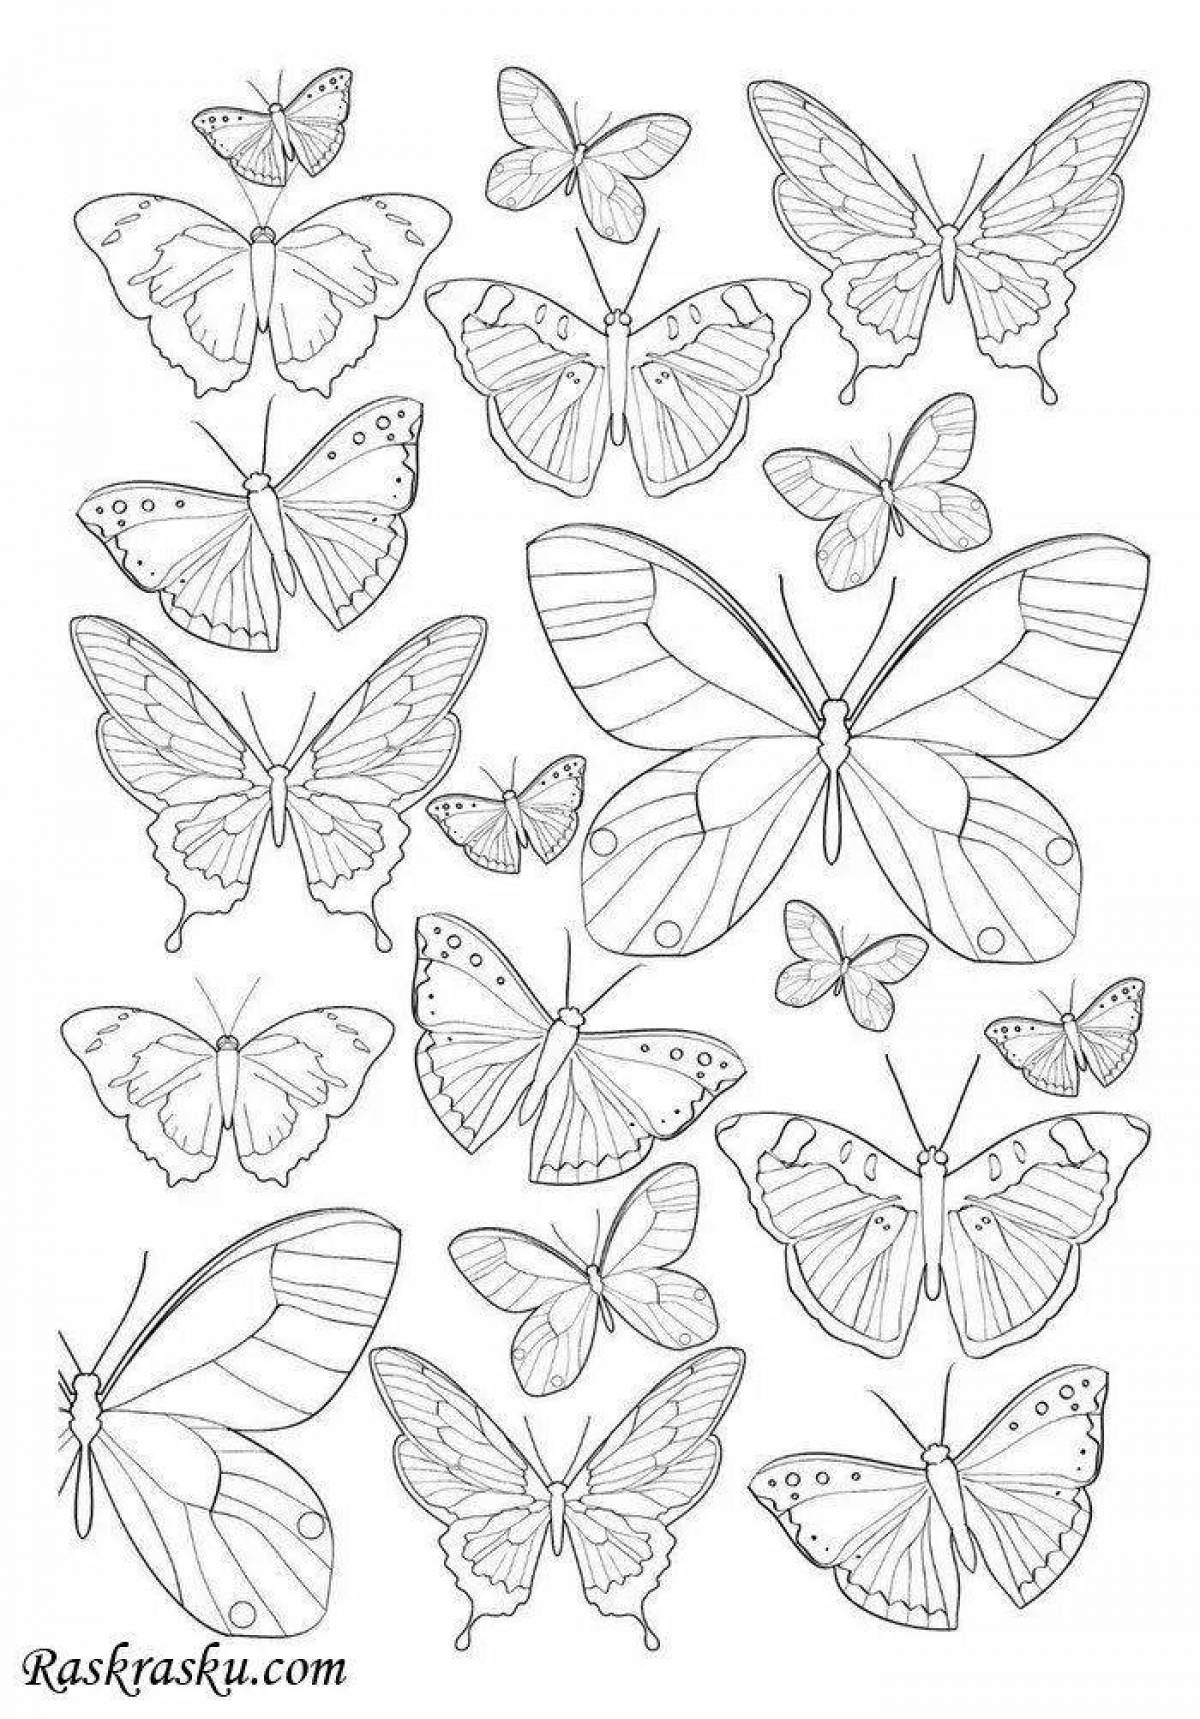 Fascinating coloring pages of butterflies